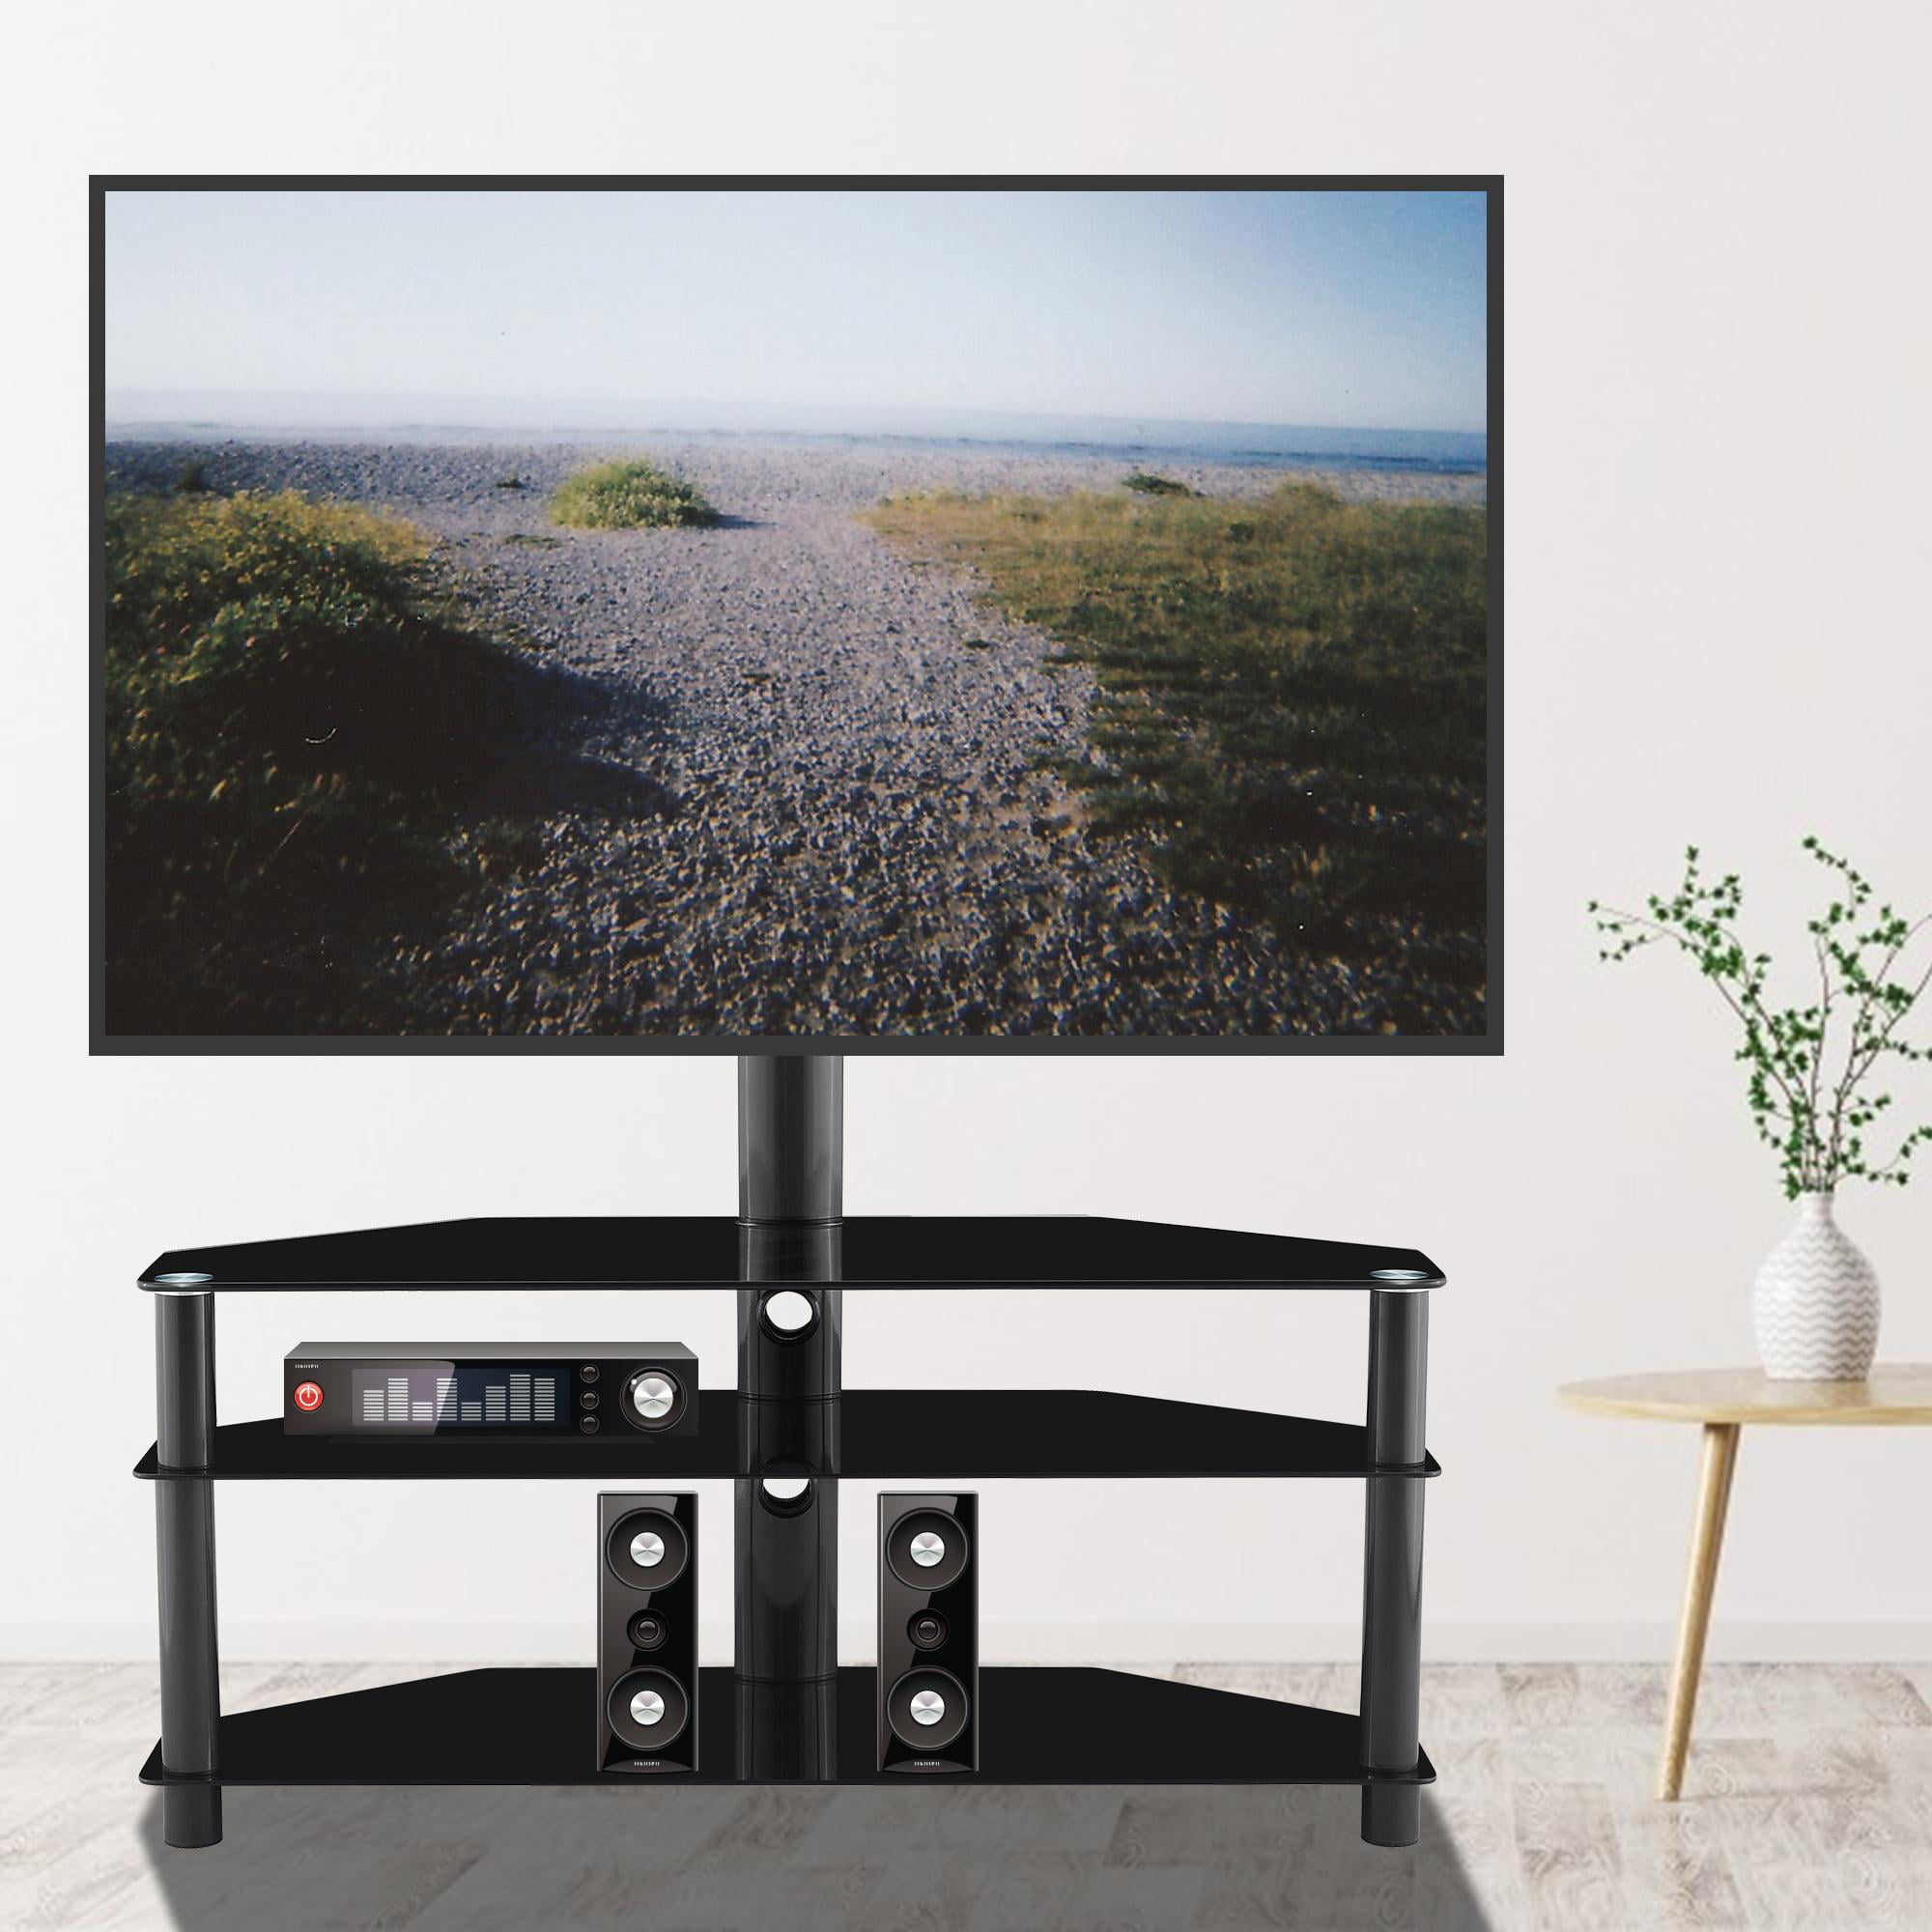 Details about   Swivel Floor TV Stand with Mount for 26-55 inch Flat or Curved Screen TVs 